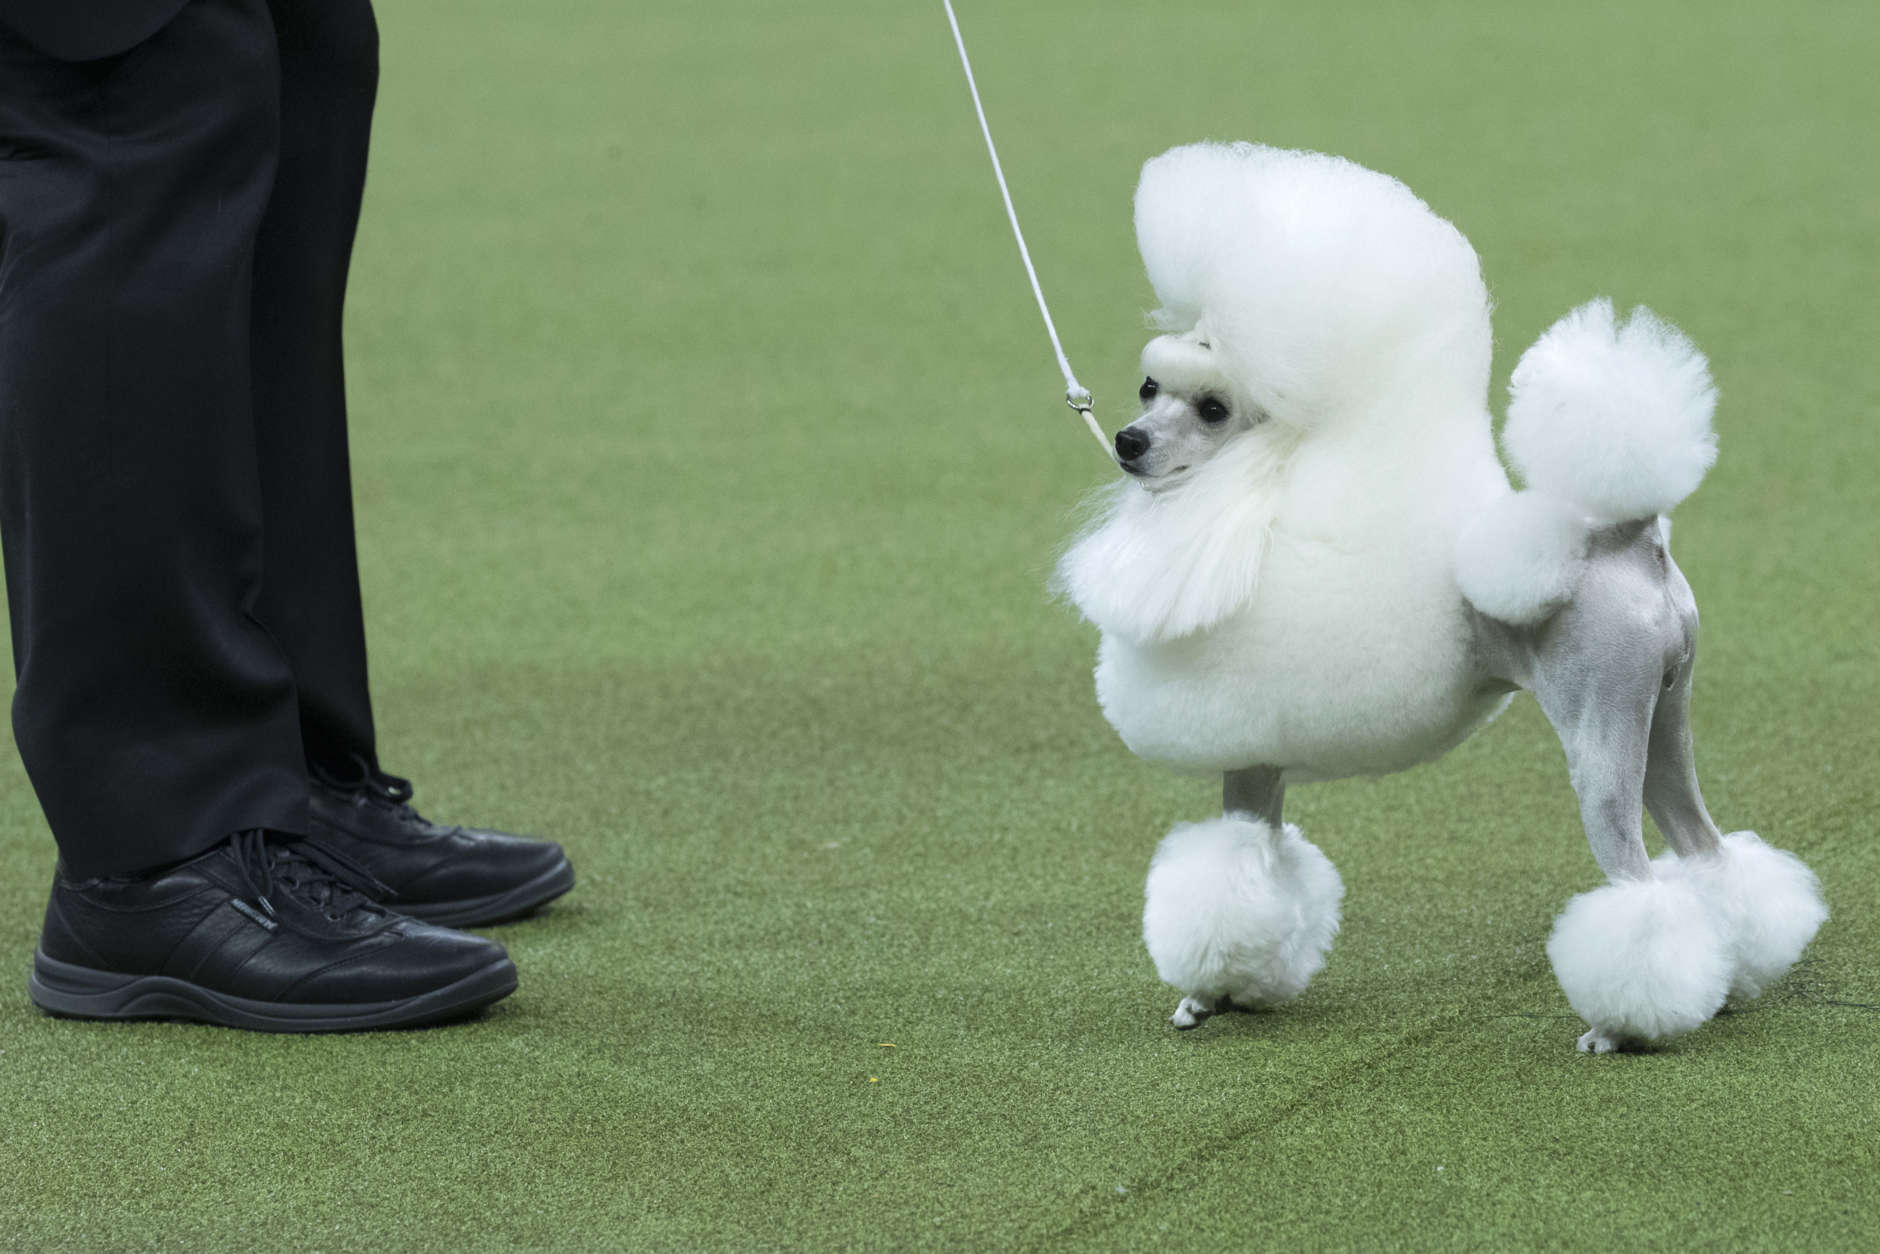 Cami, a toy poodle, competes in the Toy group during the 142nd Westminster Kennel Club Dog Show, Monday, Feb. 12, 2018, at Madison Square Garden in New York. (AP Photo/Mary Altaffer)